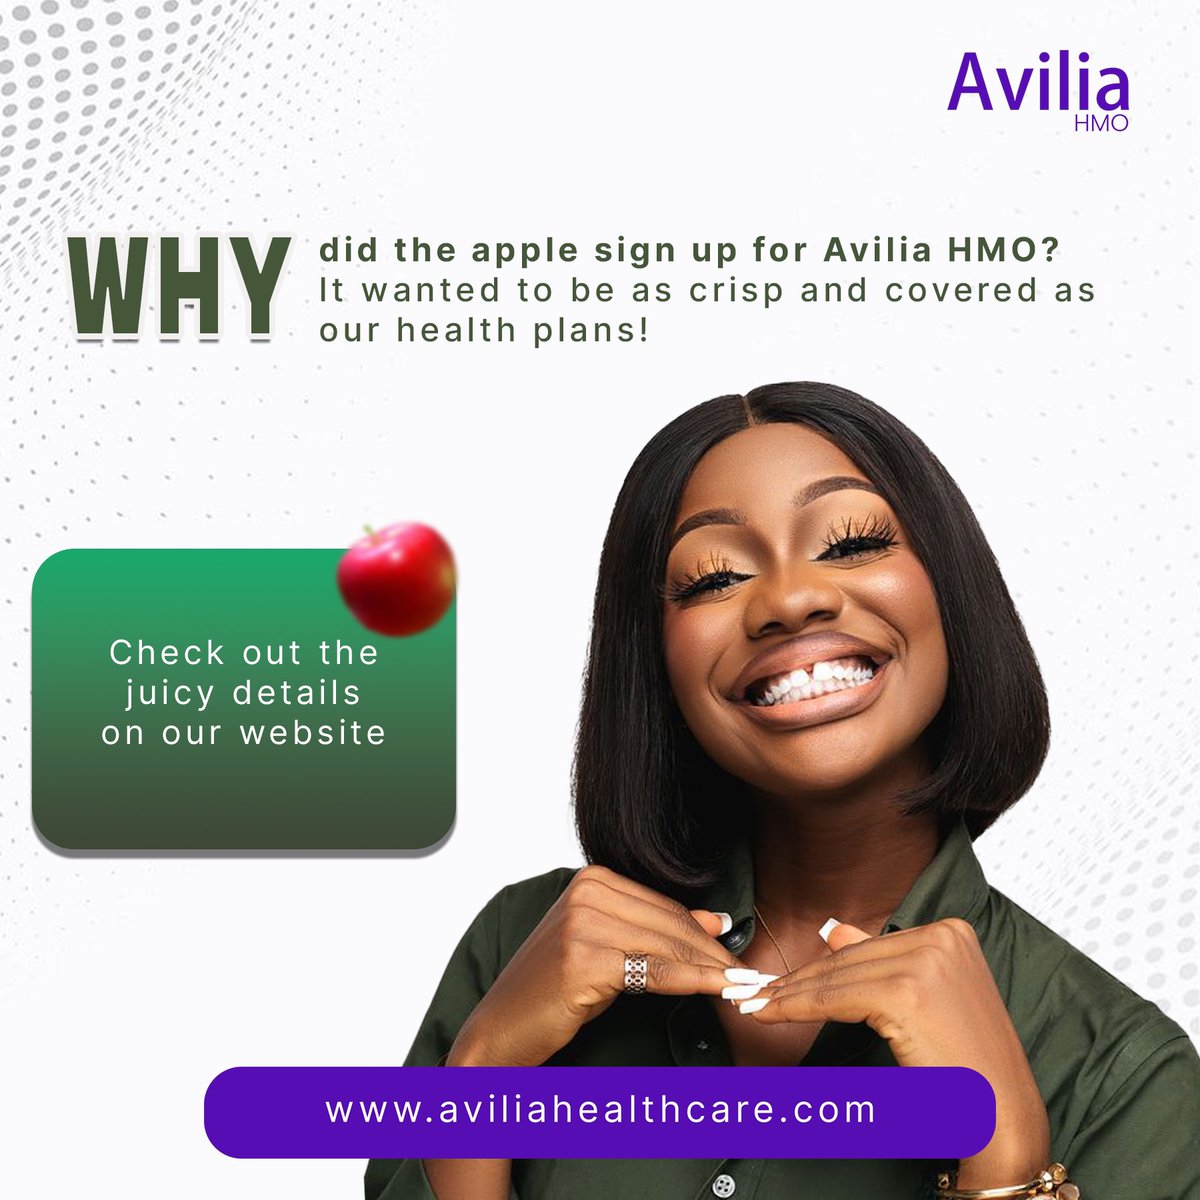 Even apples know the secret to staying crisp and covered!
Discover the juicy details of our health plans at Avilia HMO.
Your well-being, our priority! #HealthcareNigeria #HMOinNigeria #HealthInsurance #NigerianHealth #WellnessWednesday #HealthCoverage #NaijaHealth